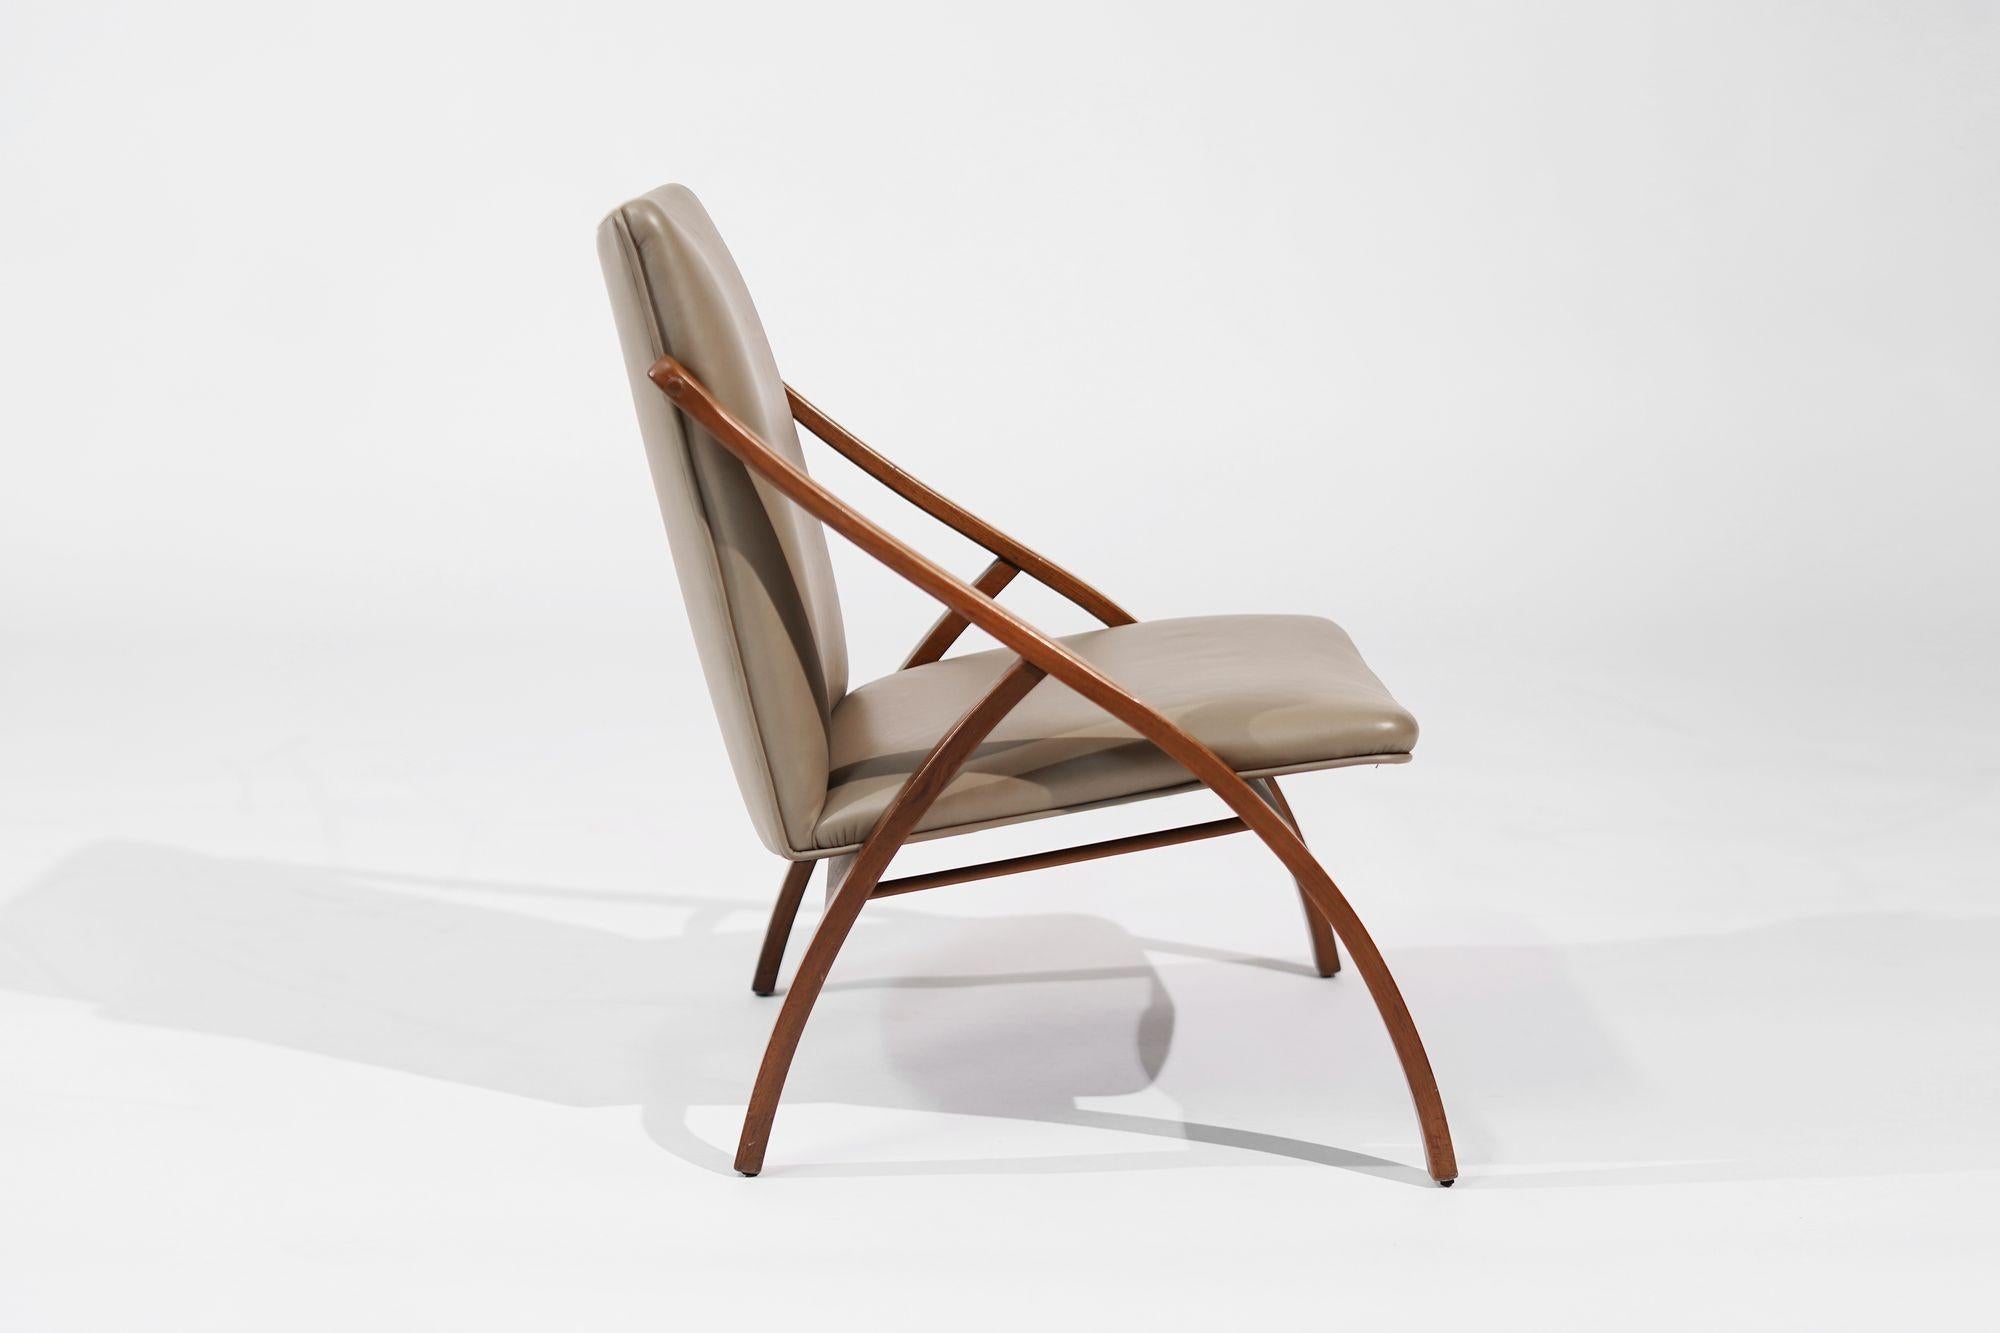 A meticulously restored Bent Teak Lounge Chair, an authentic piece of Swedish design from the 1950s. The teak wood frame exudes mid-century charm, showcasing its natural grain patterns and warmth. Fully revived to its original splendor, this chair